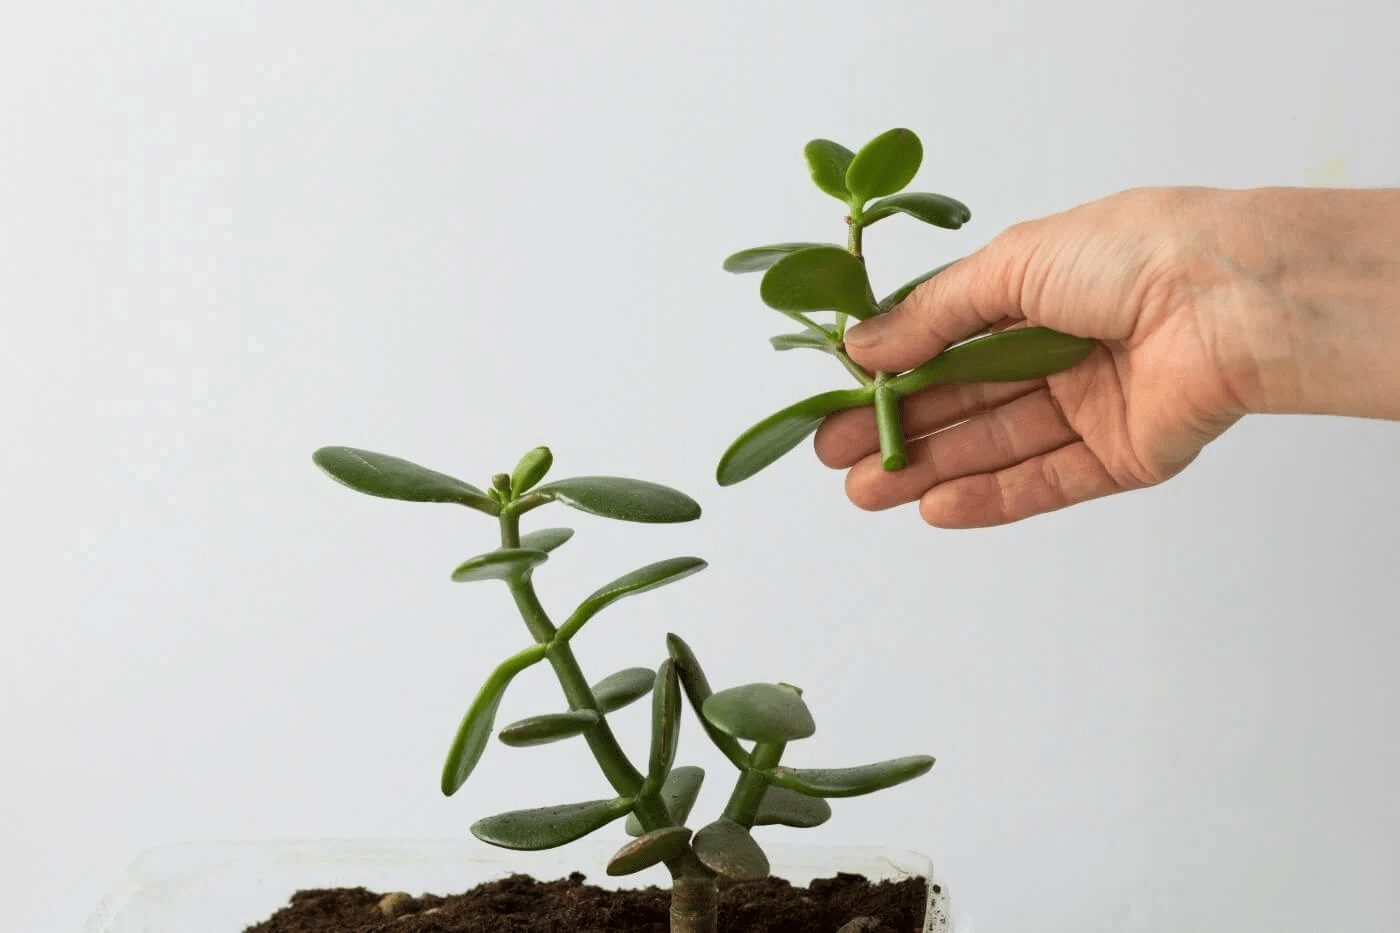 Types of jade plants that can be propagated using stem cuttings.